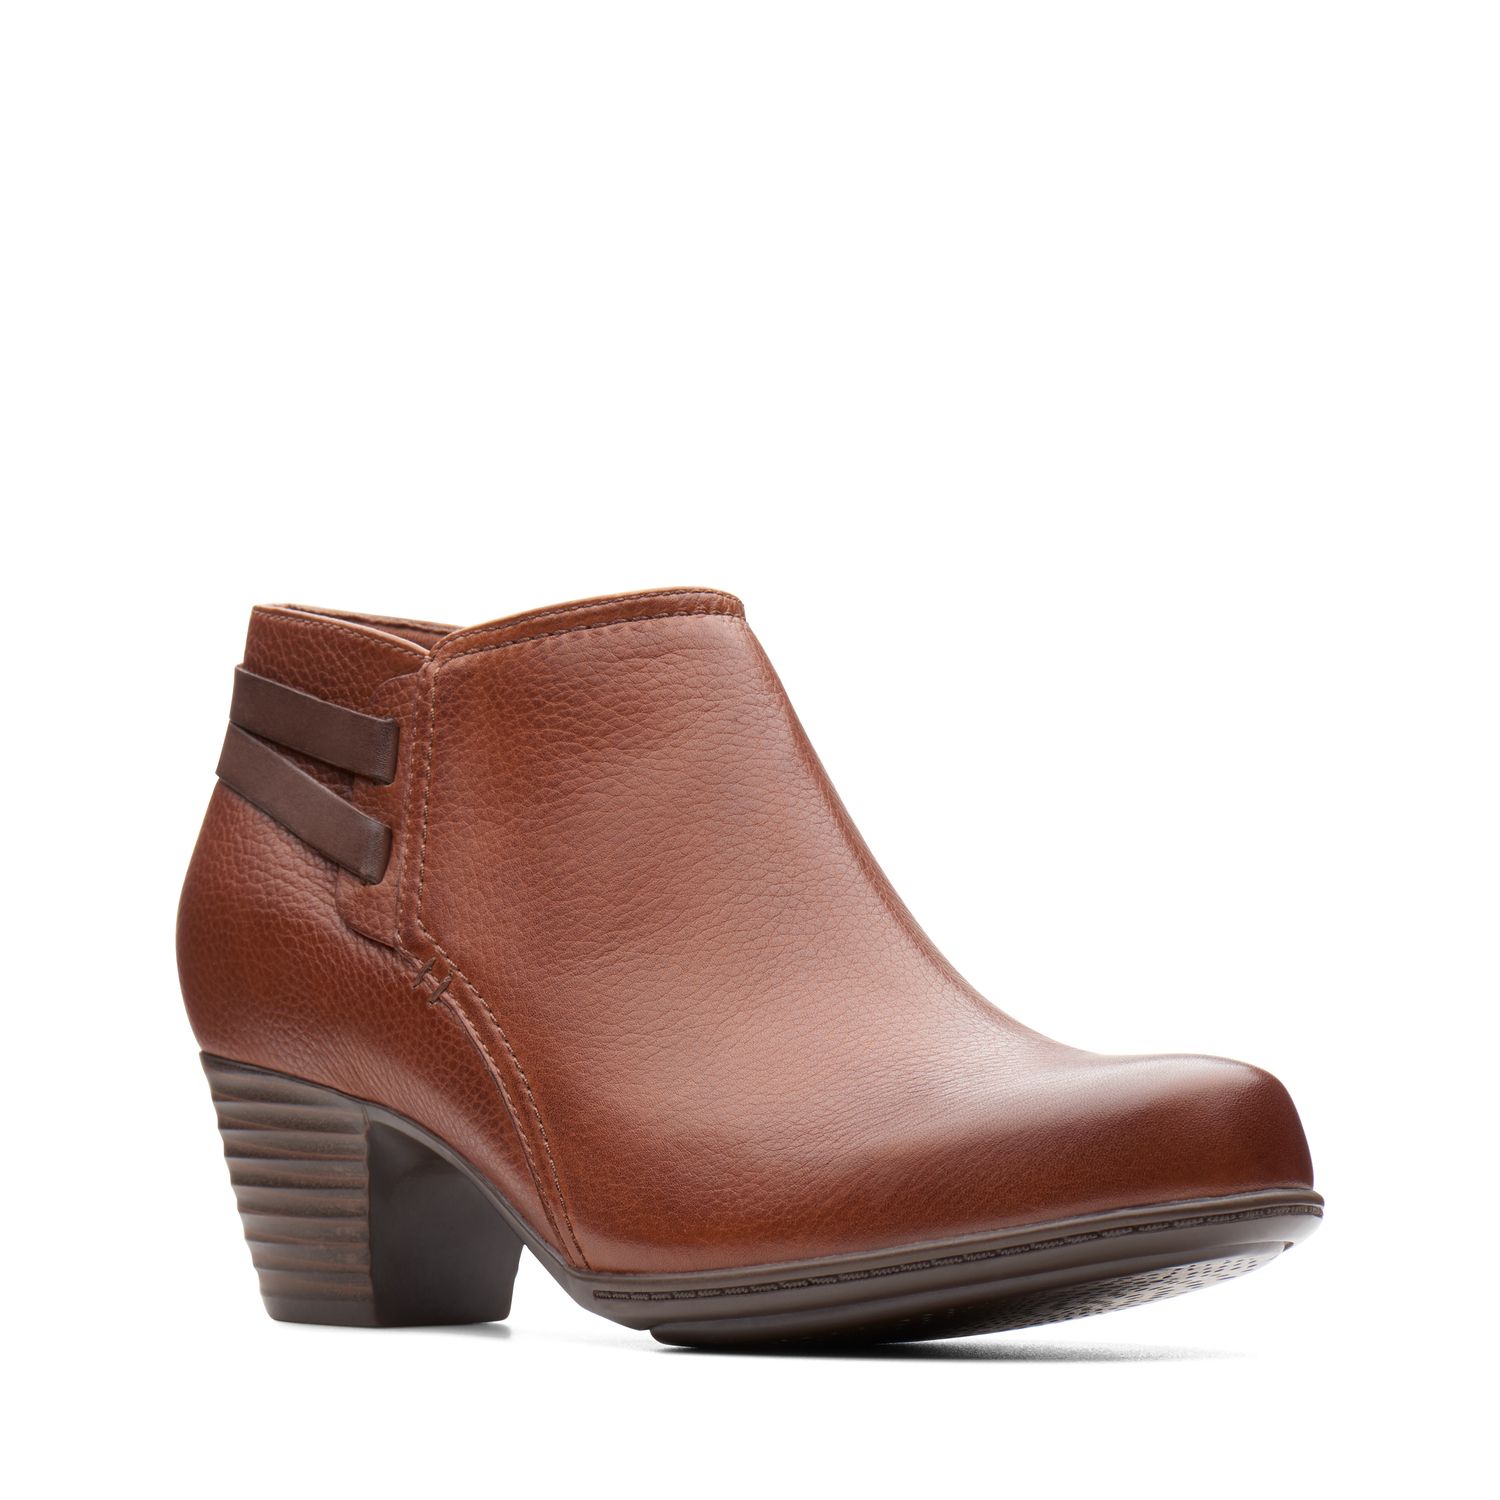 Clarks Valarie 2 Ashly Women's Ankle Boots